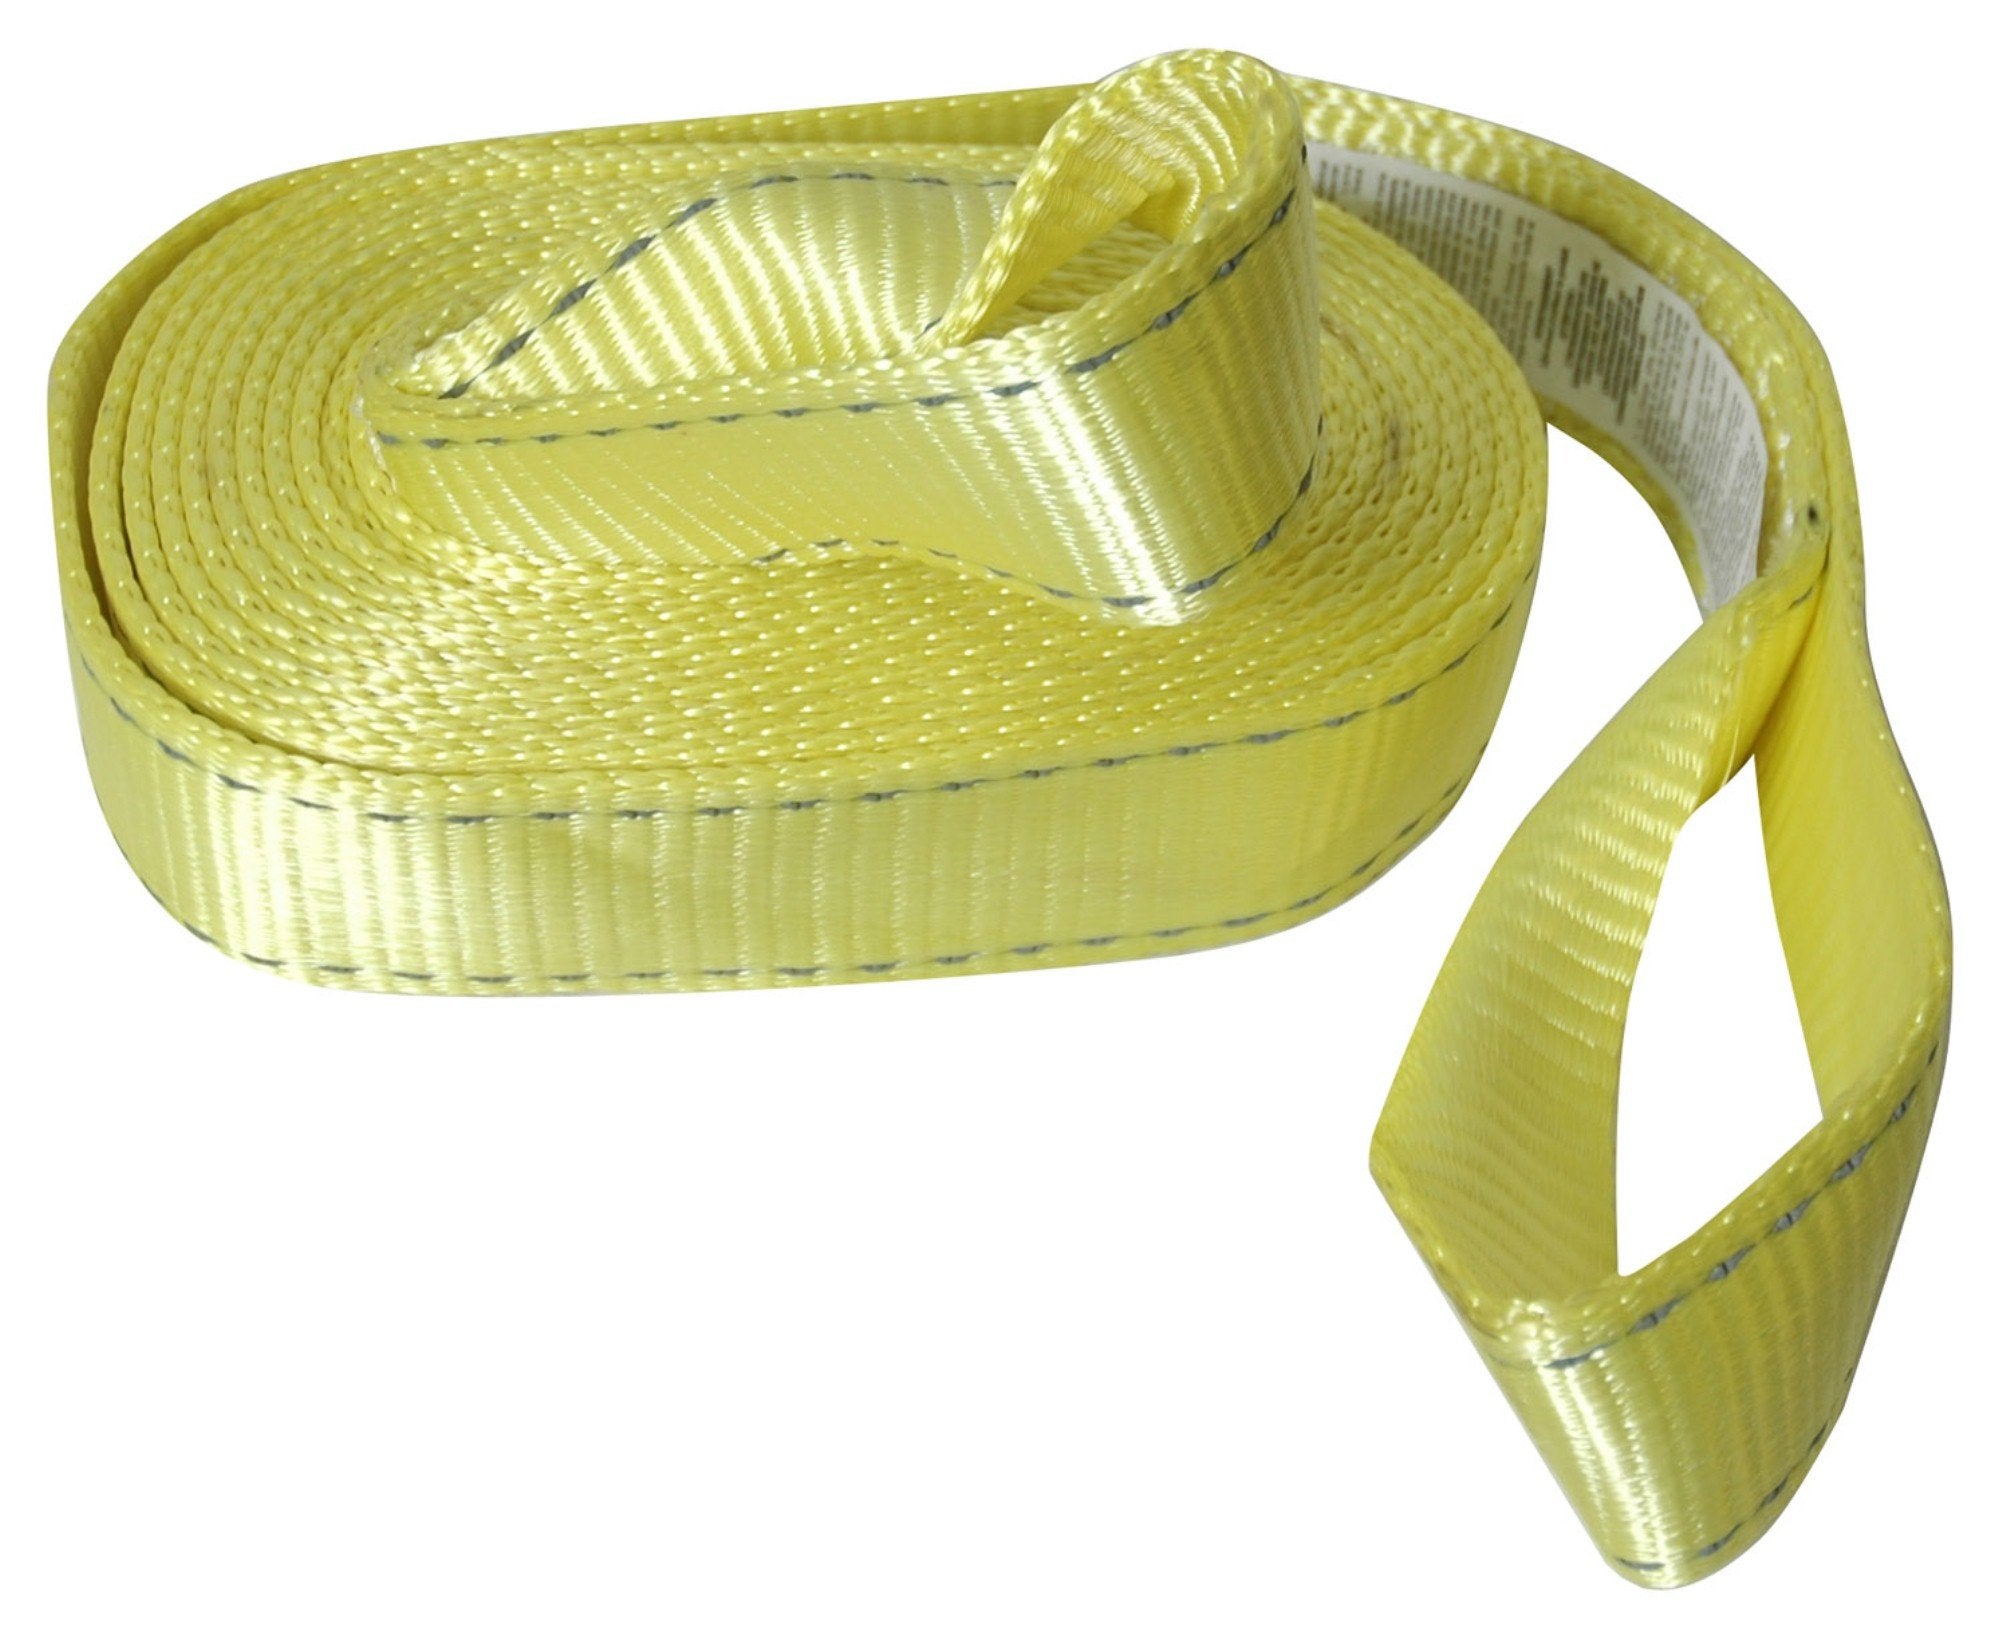 Reese Secure 9426400 20' Reflective Tow Strap with Loop Ends